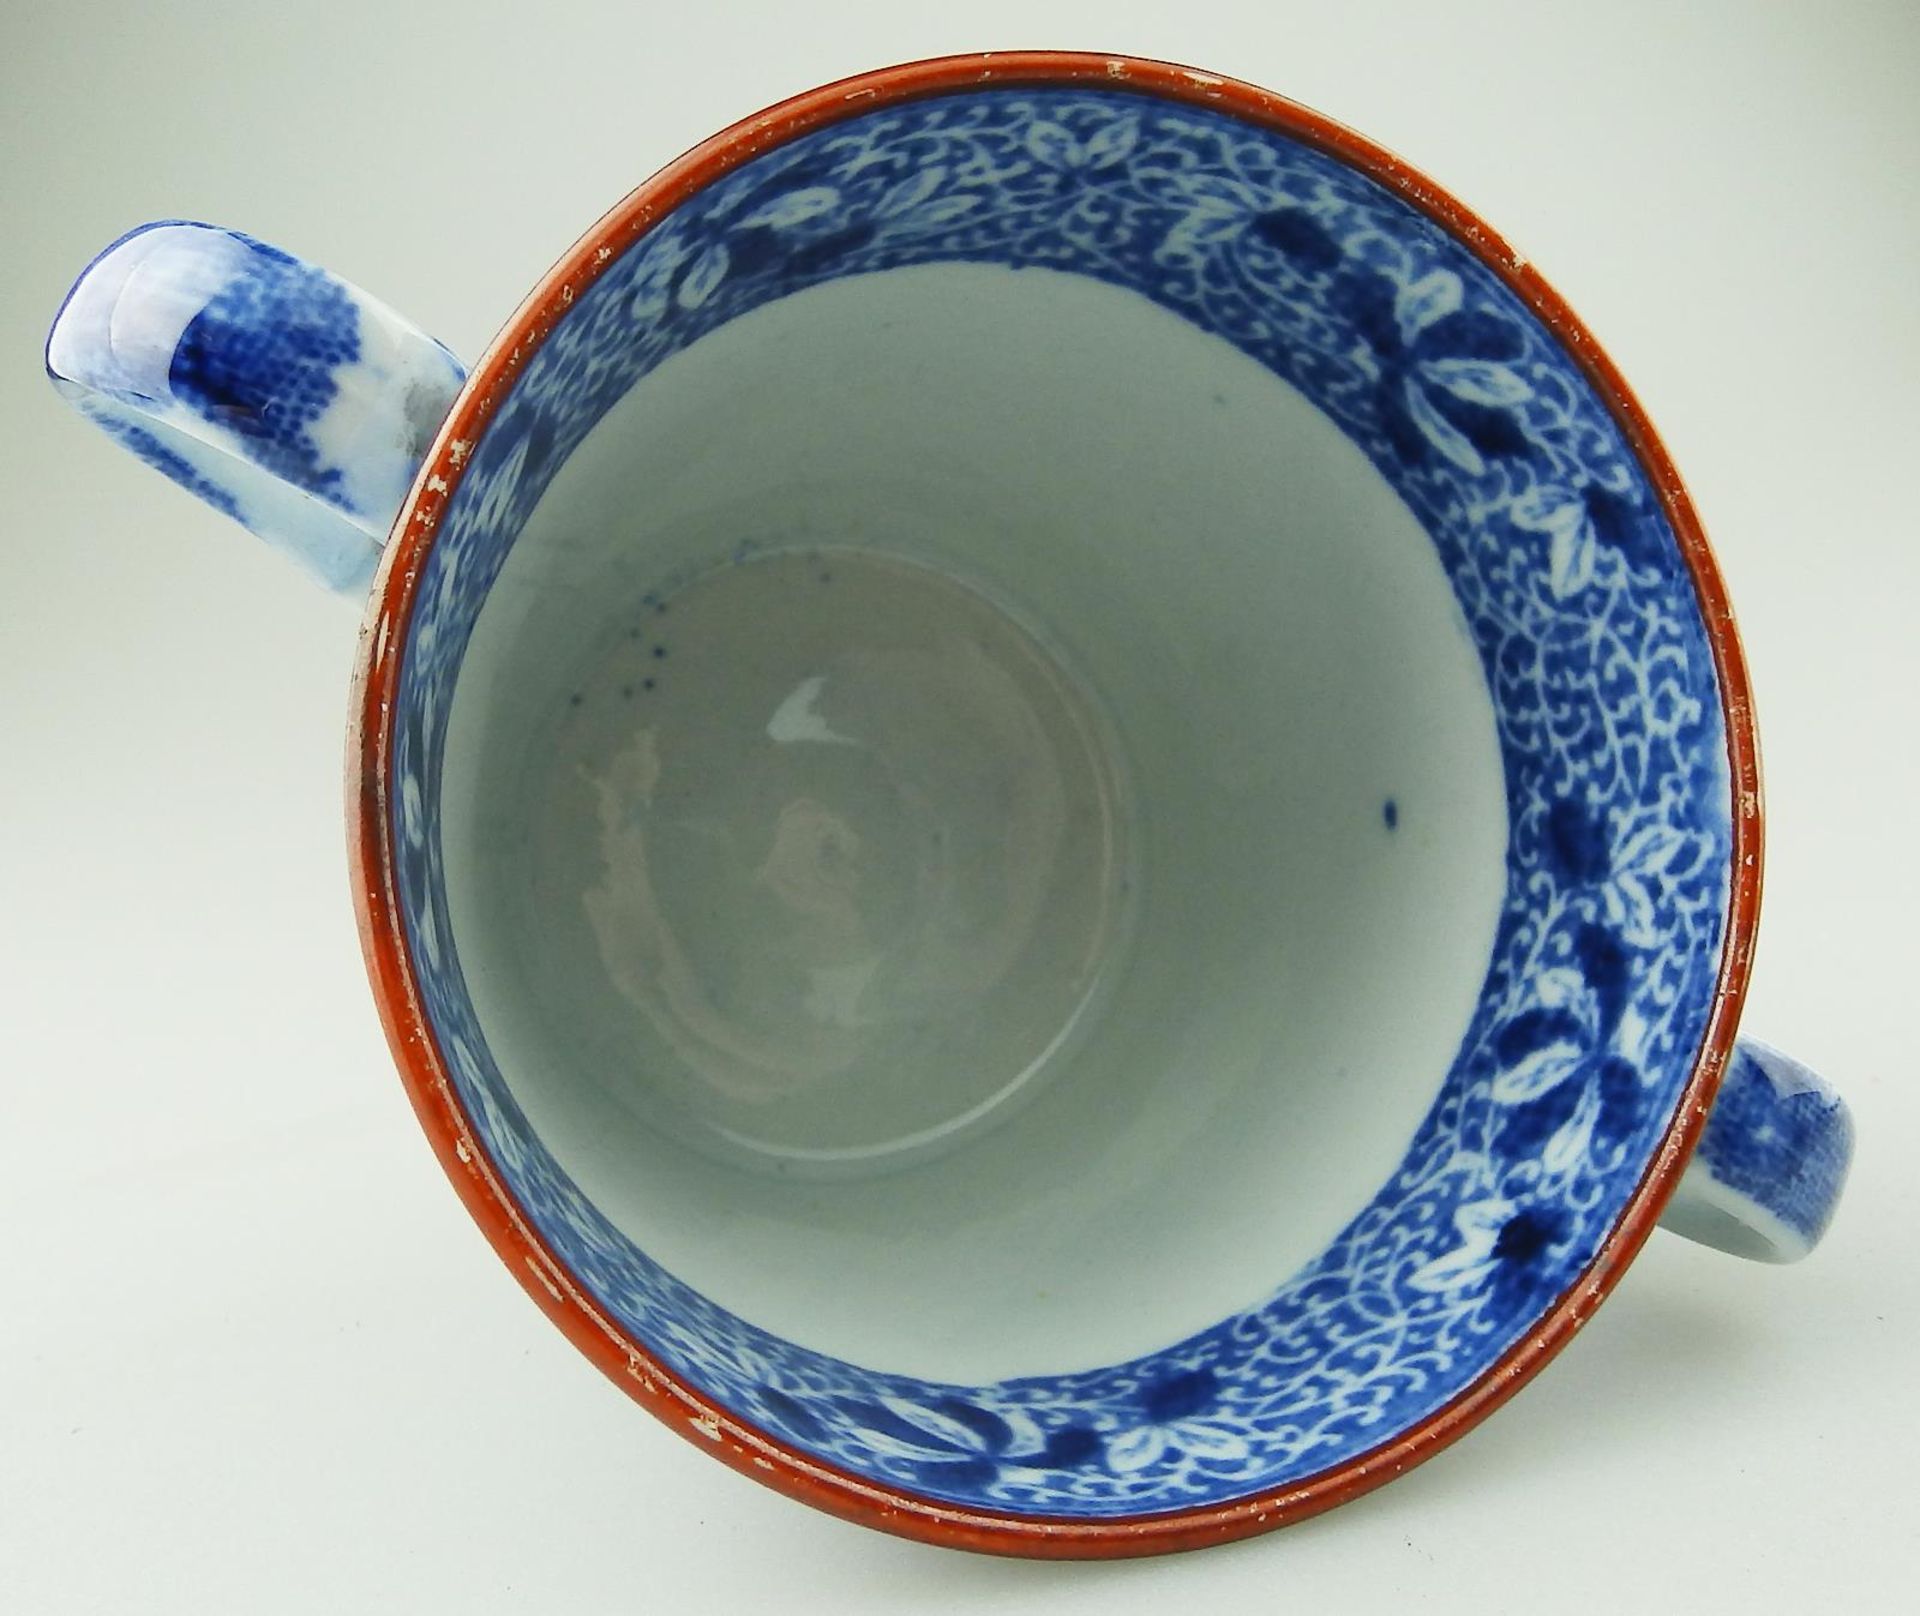 An English pearlware Pottery blue & white transferware Cup & Saucer C.1810 - Image 5 of 8